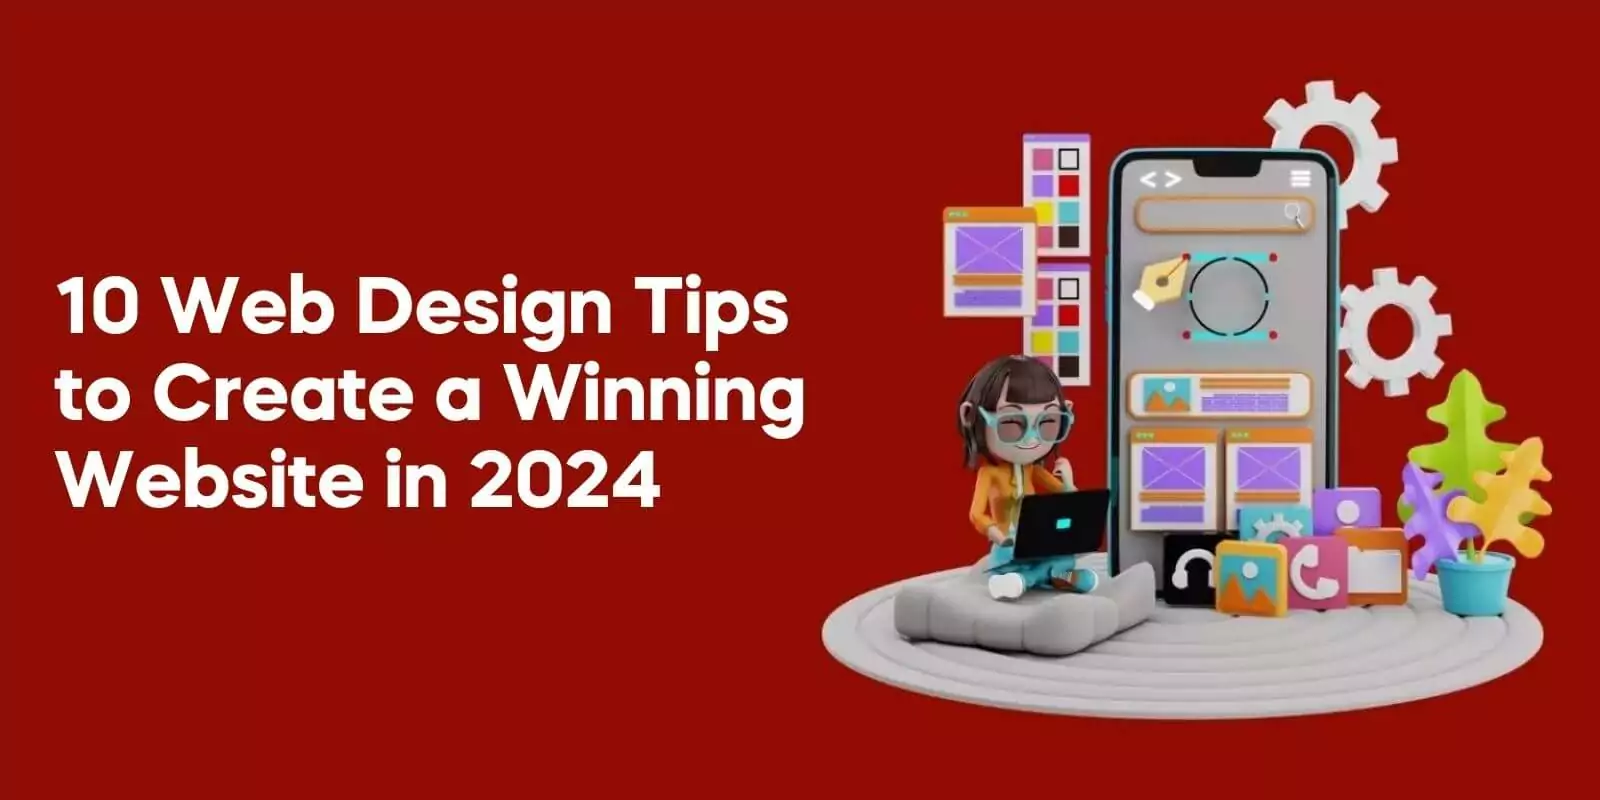 10 Web Design Tips to Create a Winning Website in 2024